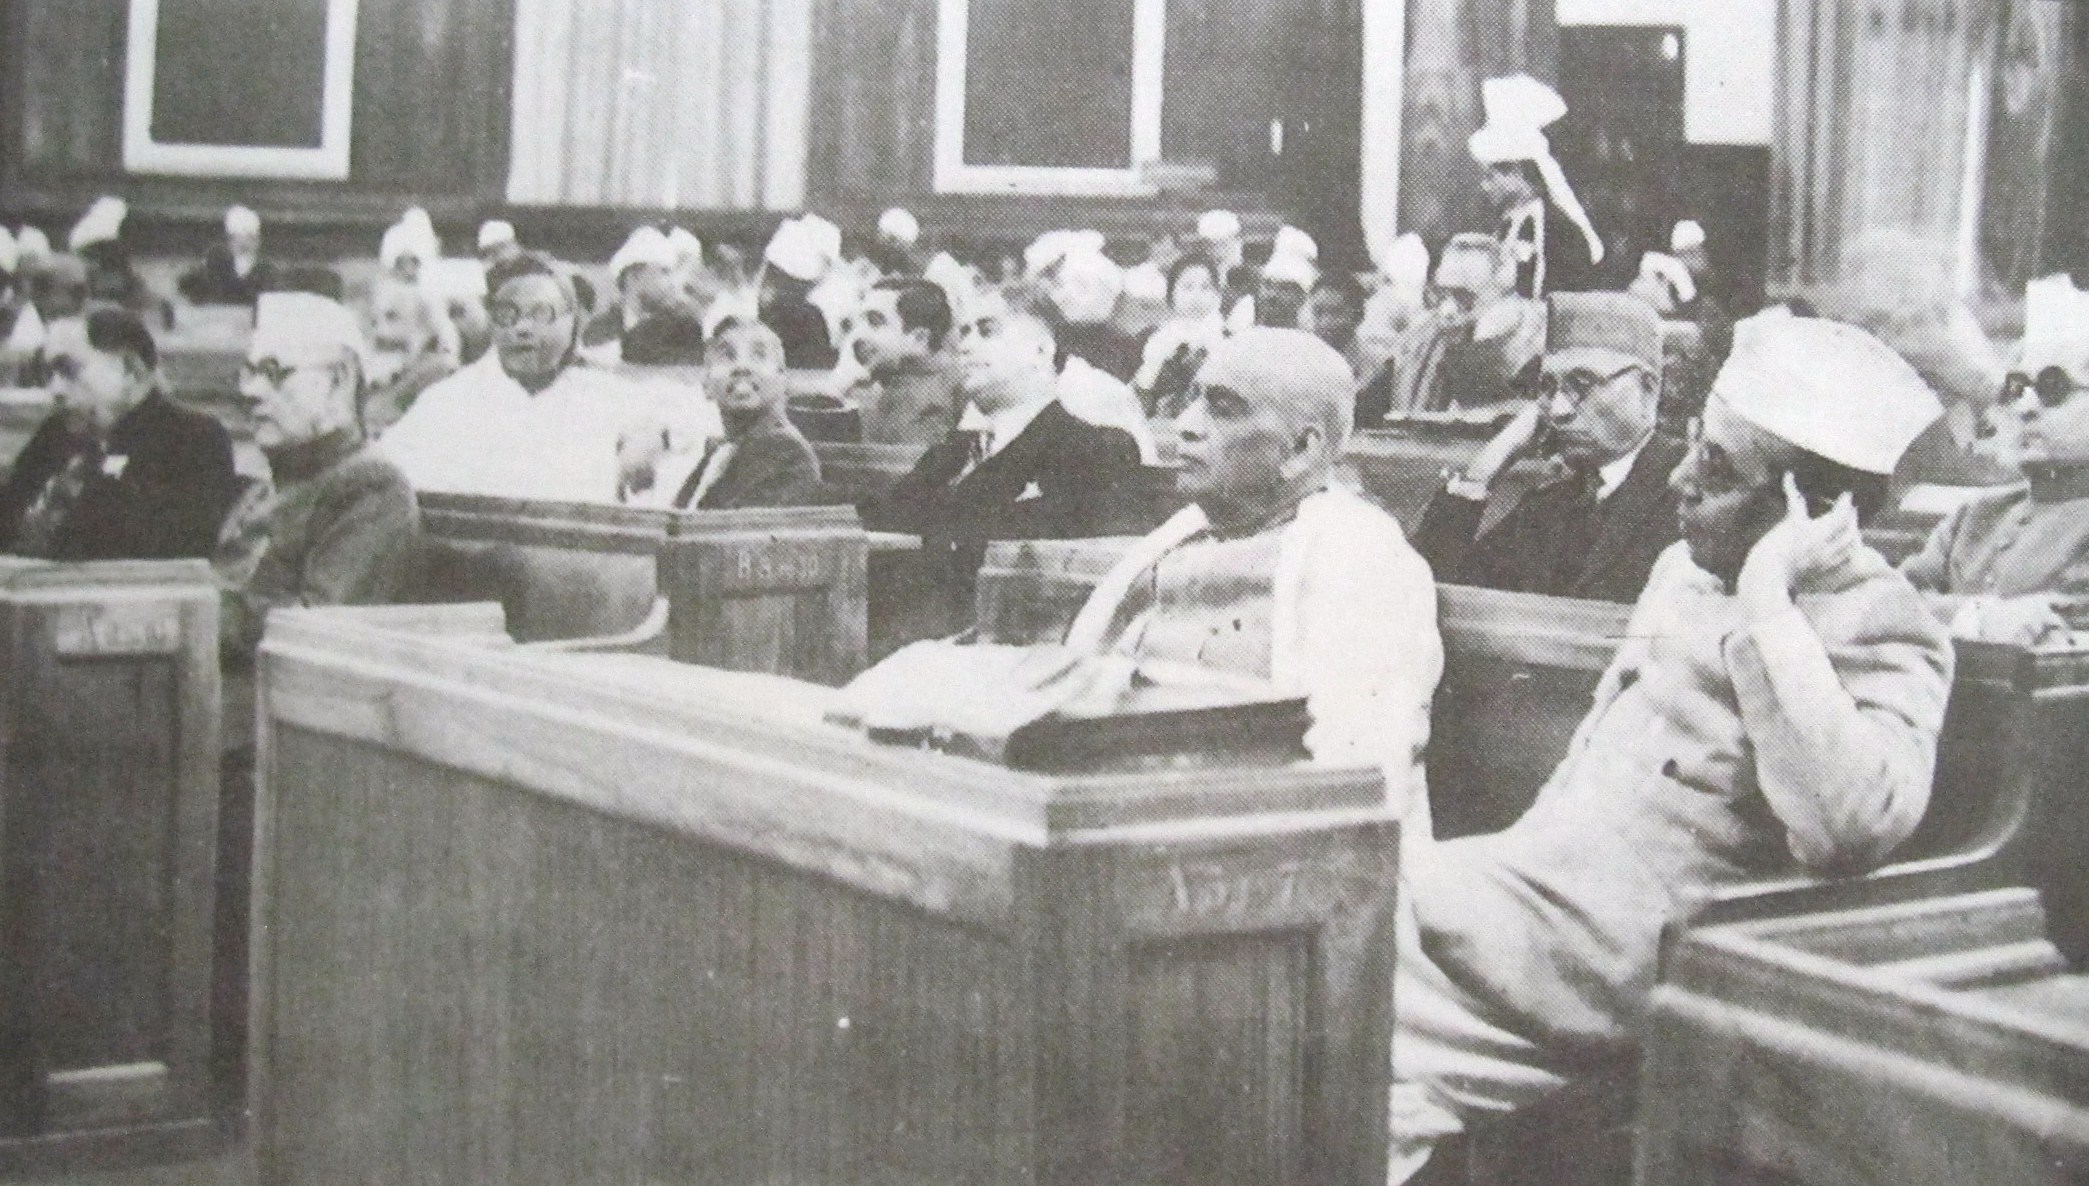 Indian Constituent Assembly